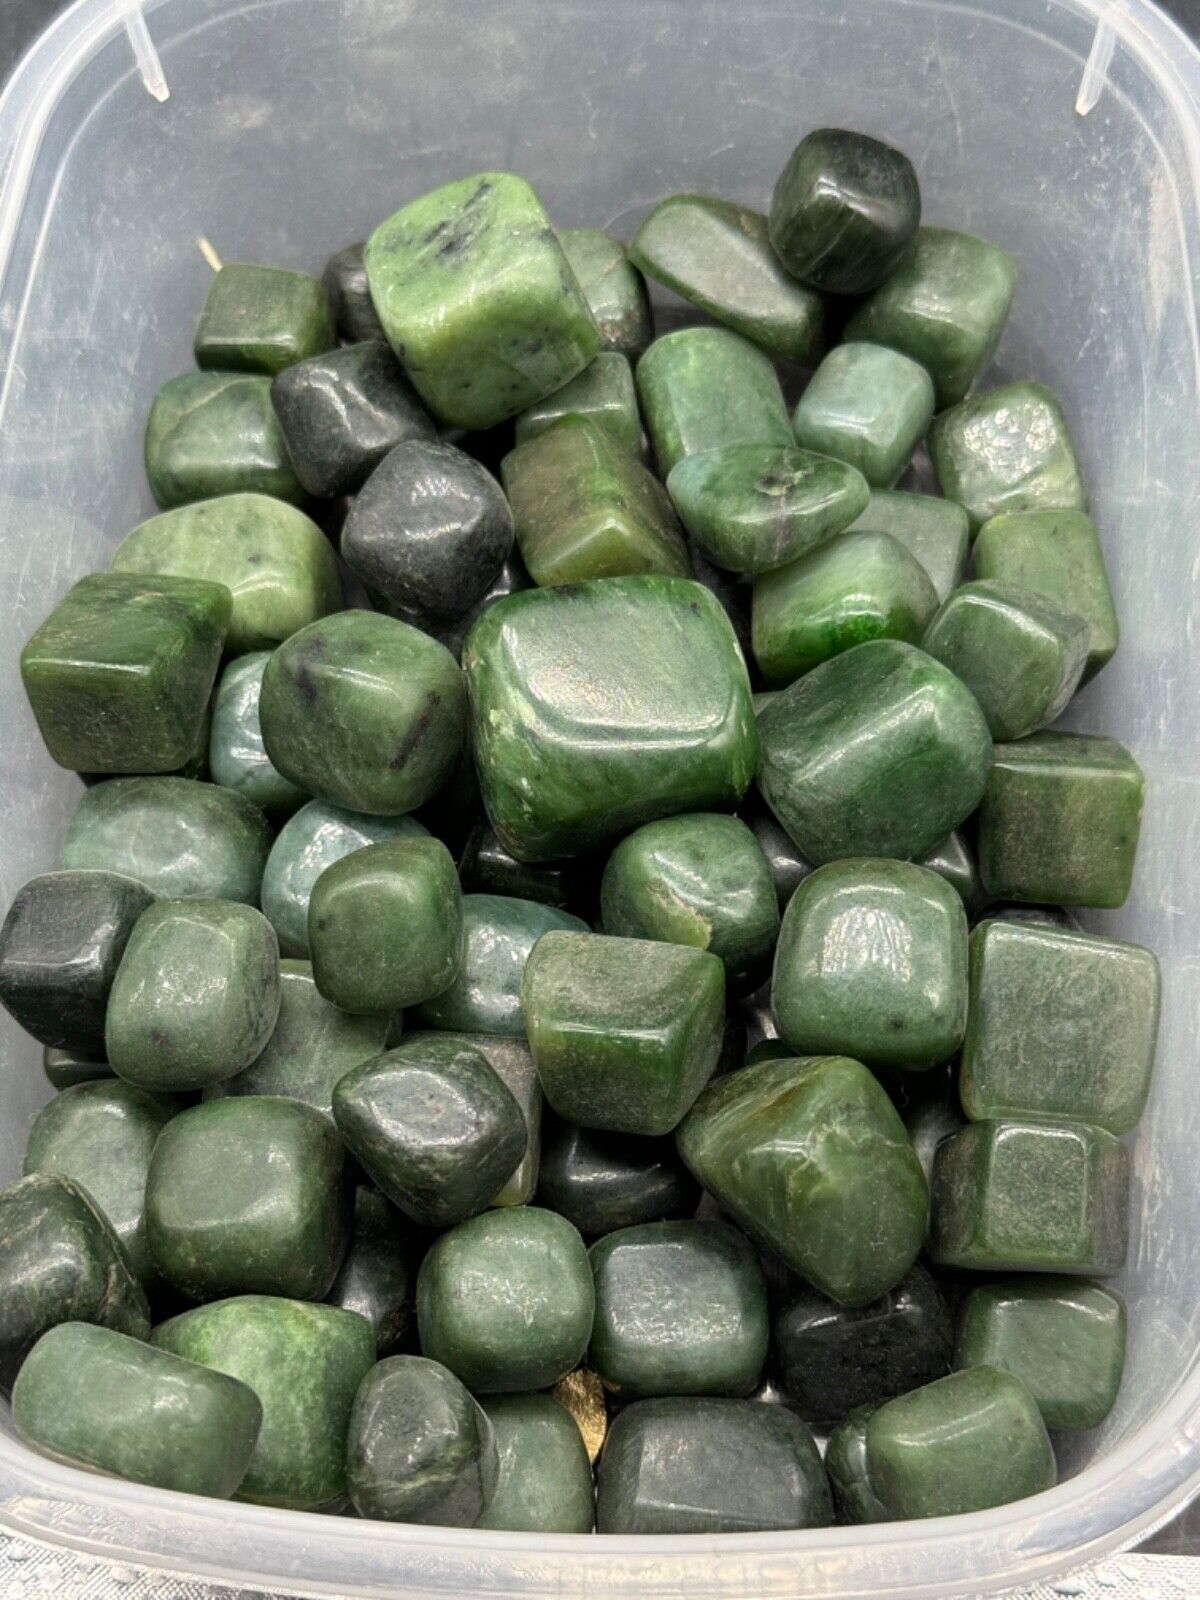 Top quality Nephrite jade wholesale tumbled stone from pakistan- 800 grams